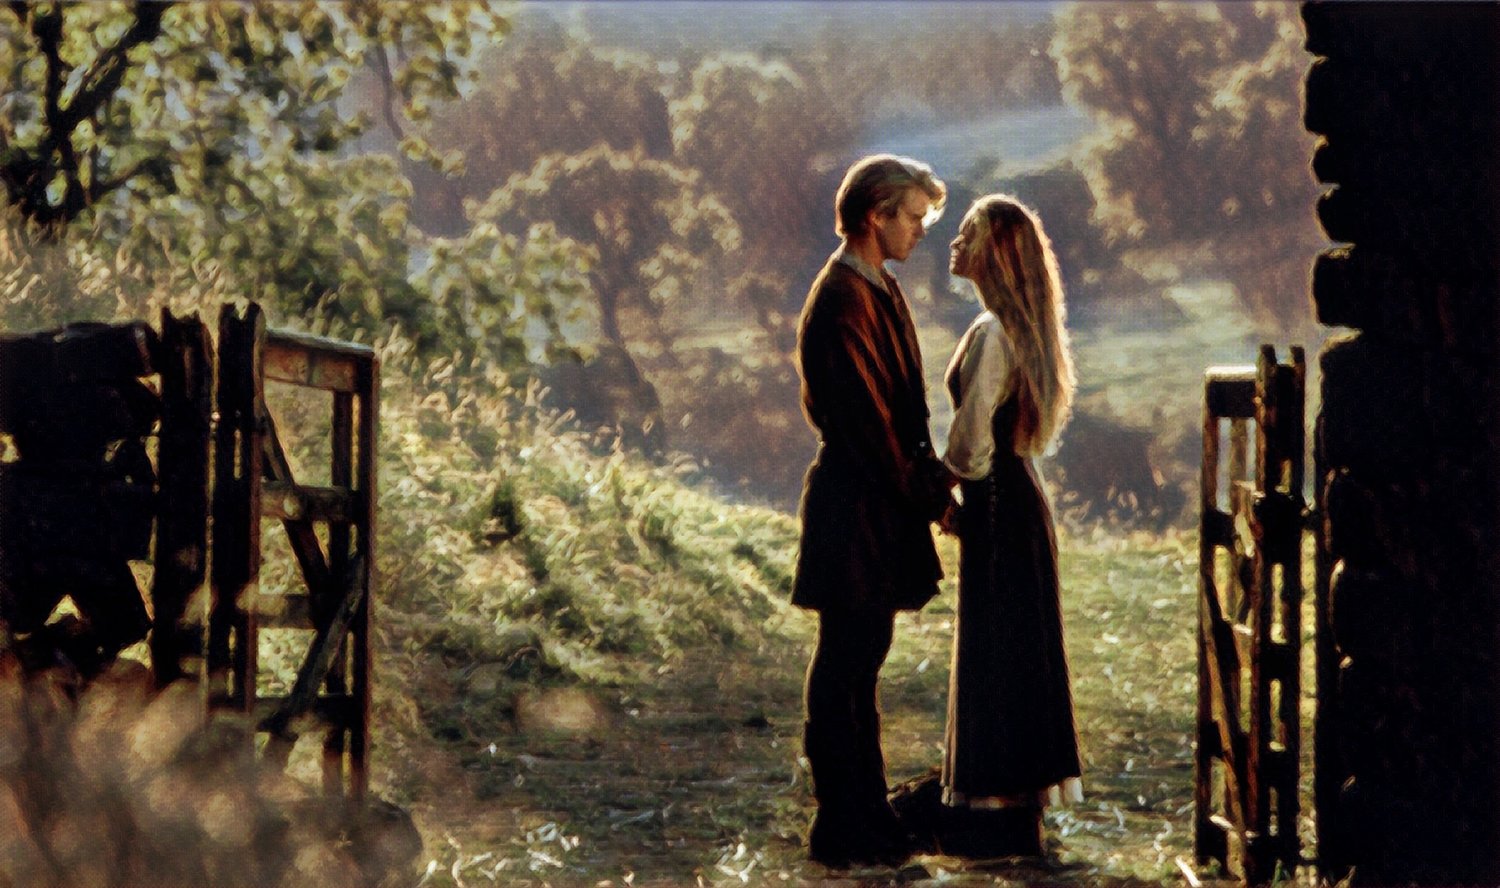 The Princess Bride, minutes 42 to 44